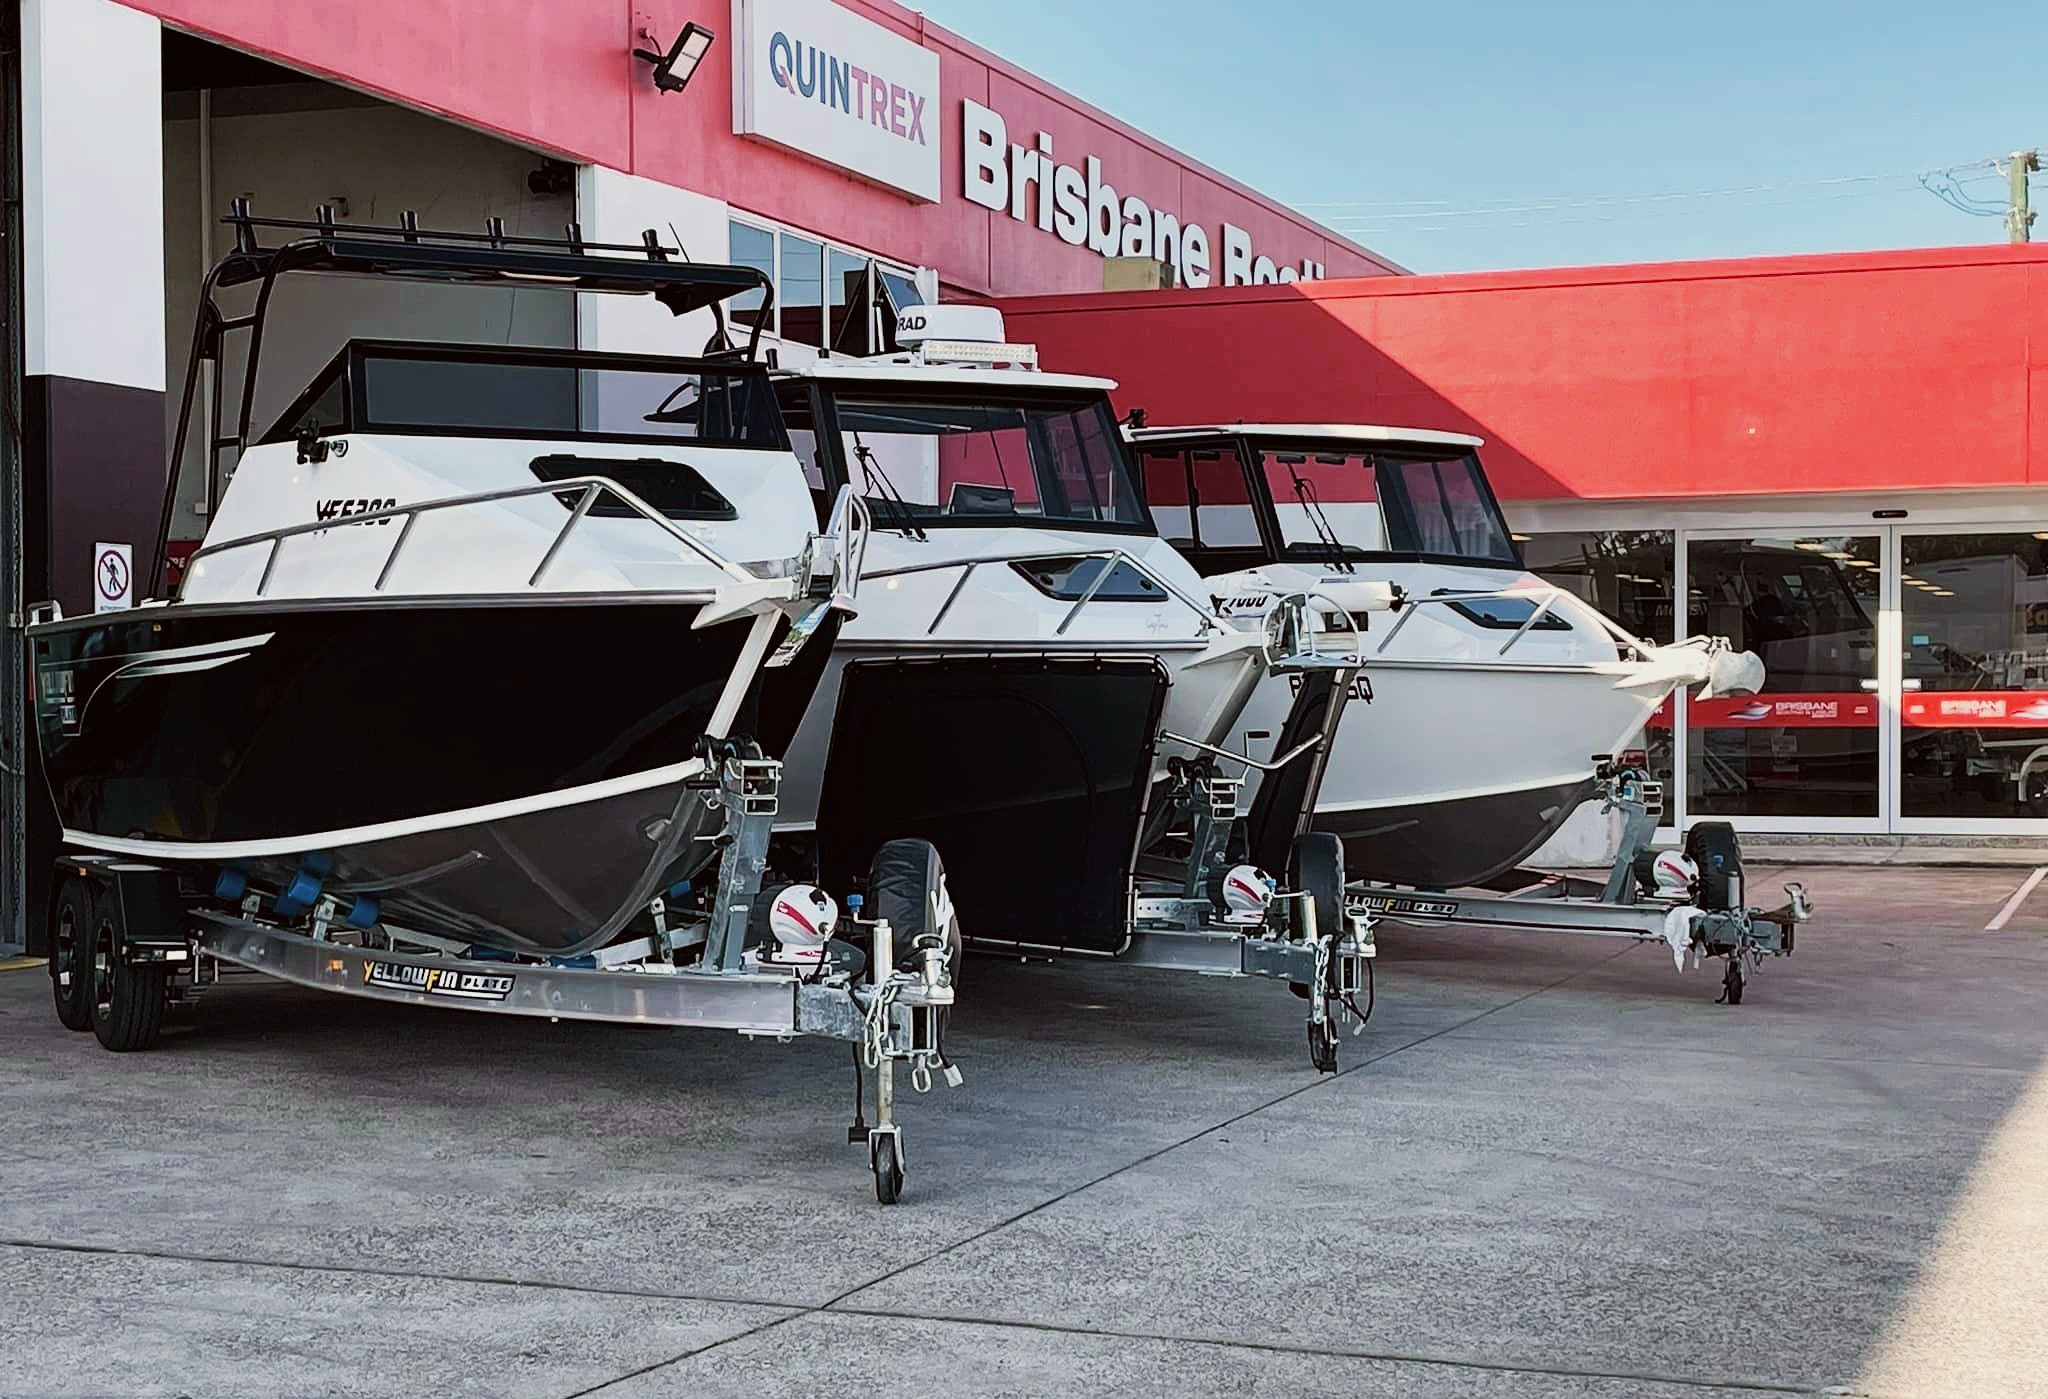 A row of Yellowfin boats lined up outside Brisbane Boating dealership.